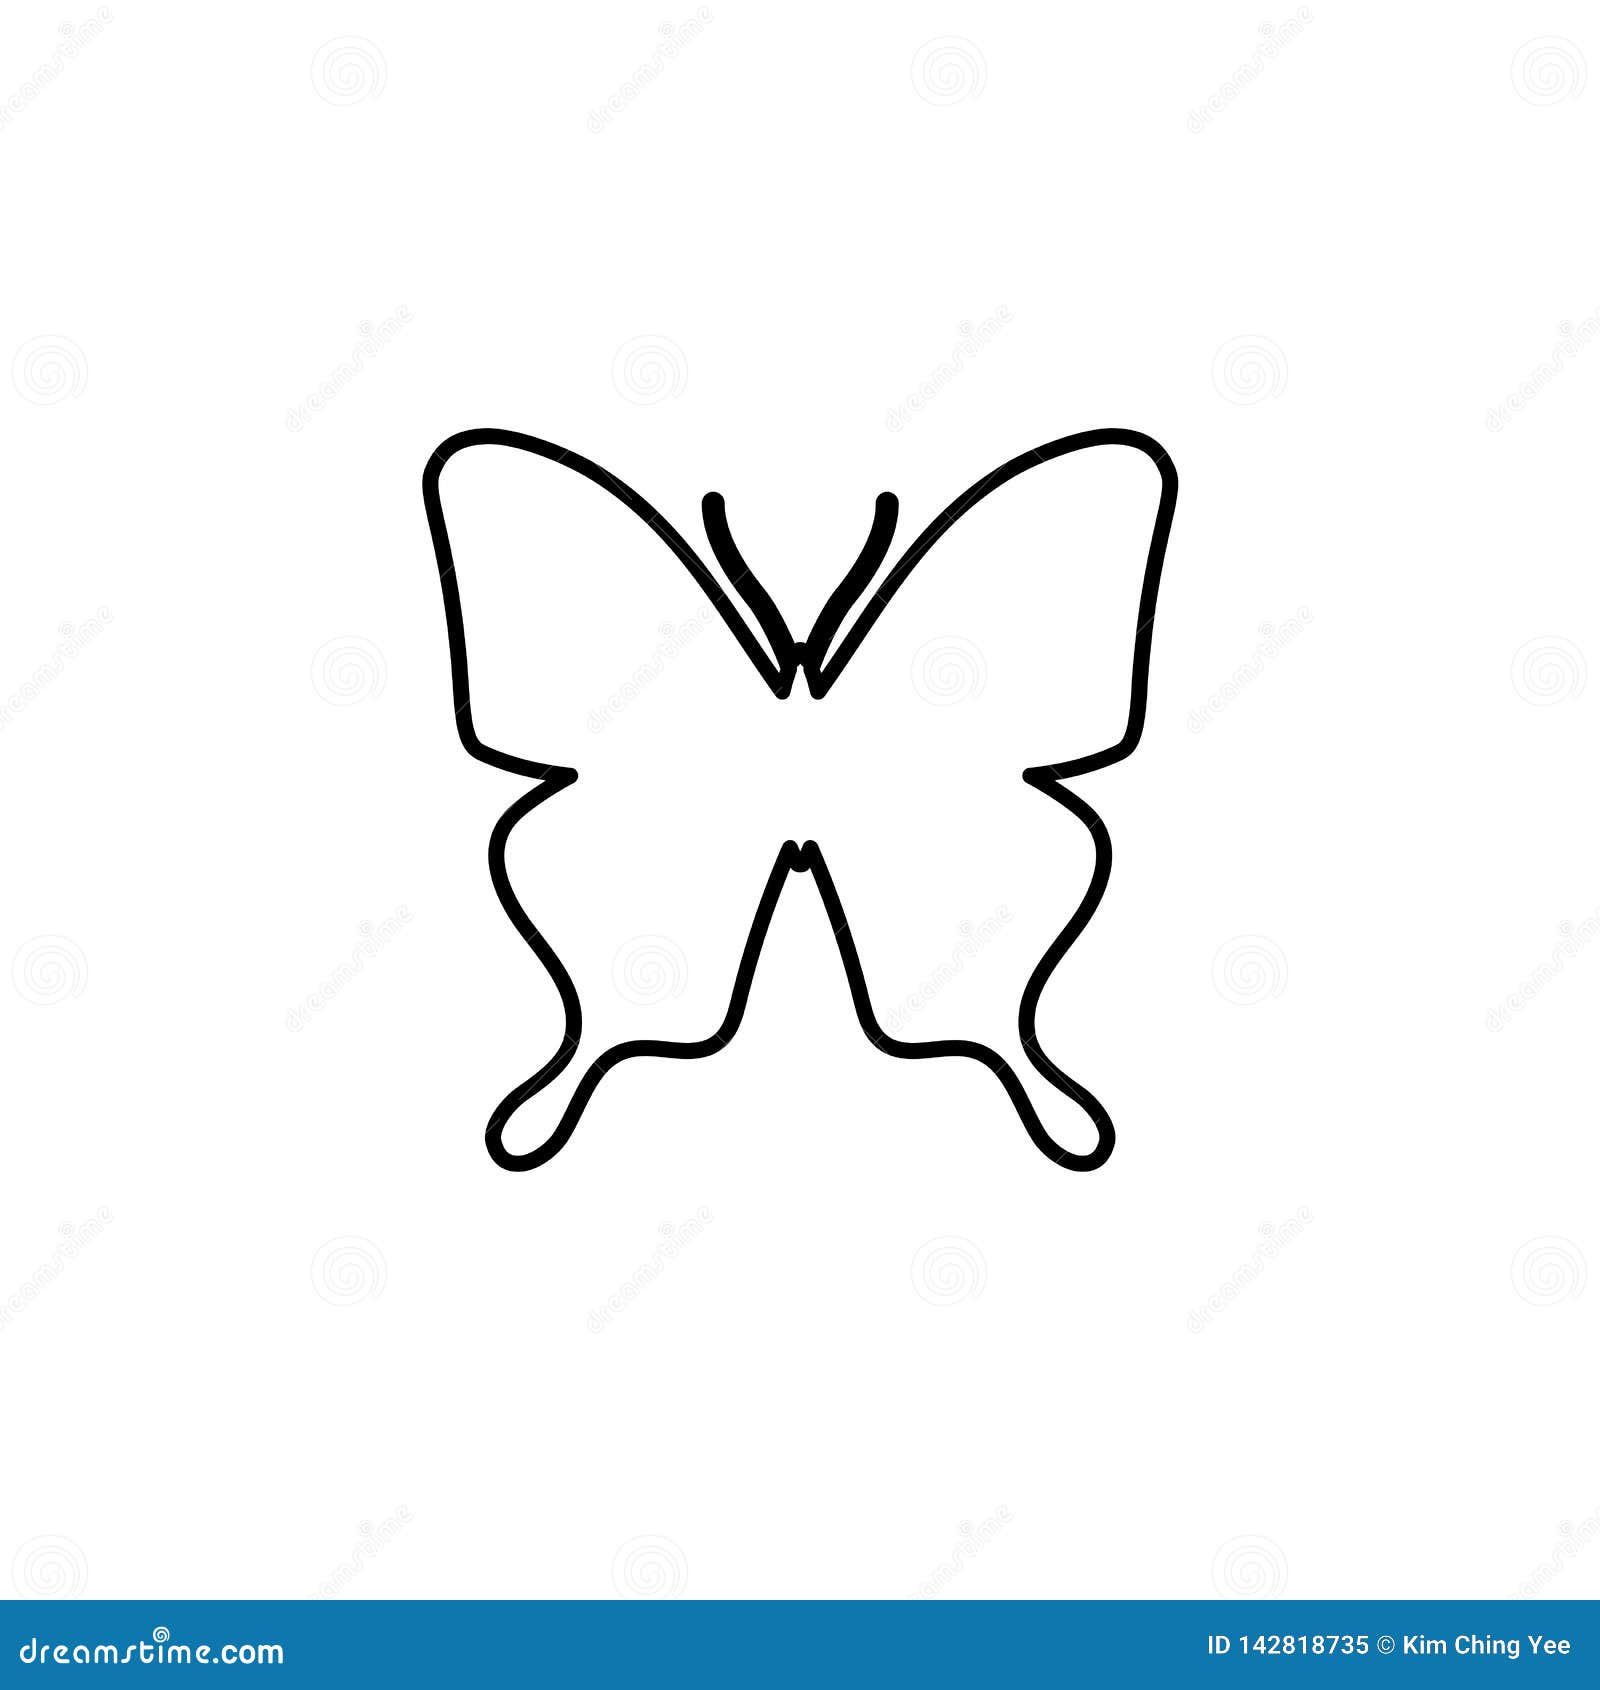 Butterfly line icon stock vector. Illustration of silhouettes - 142818735